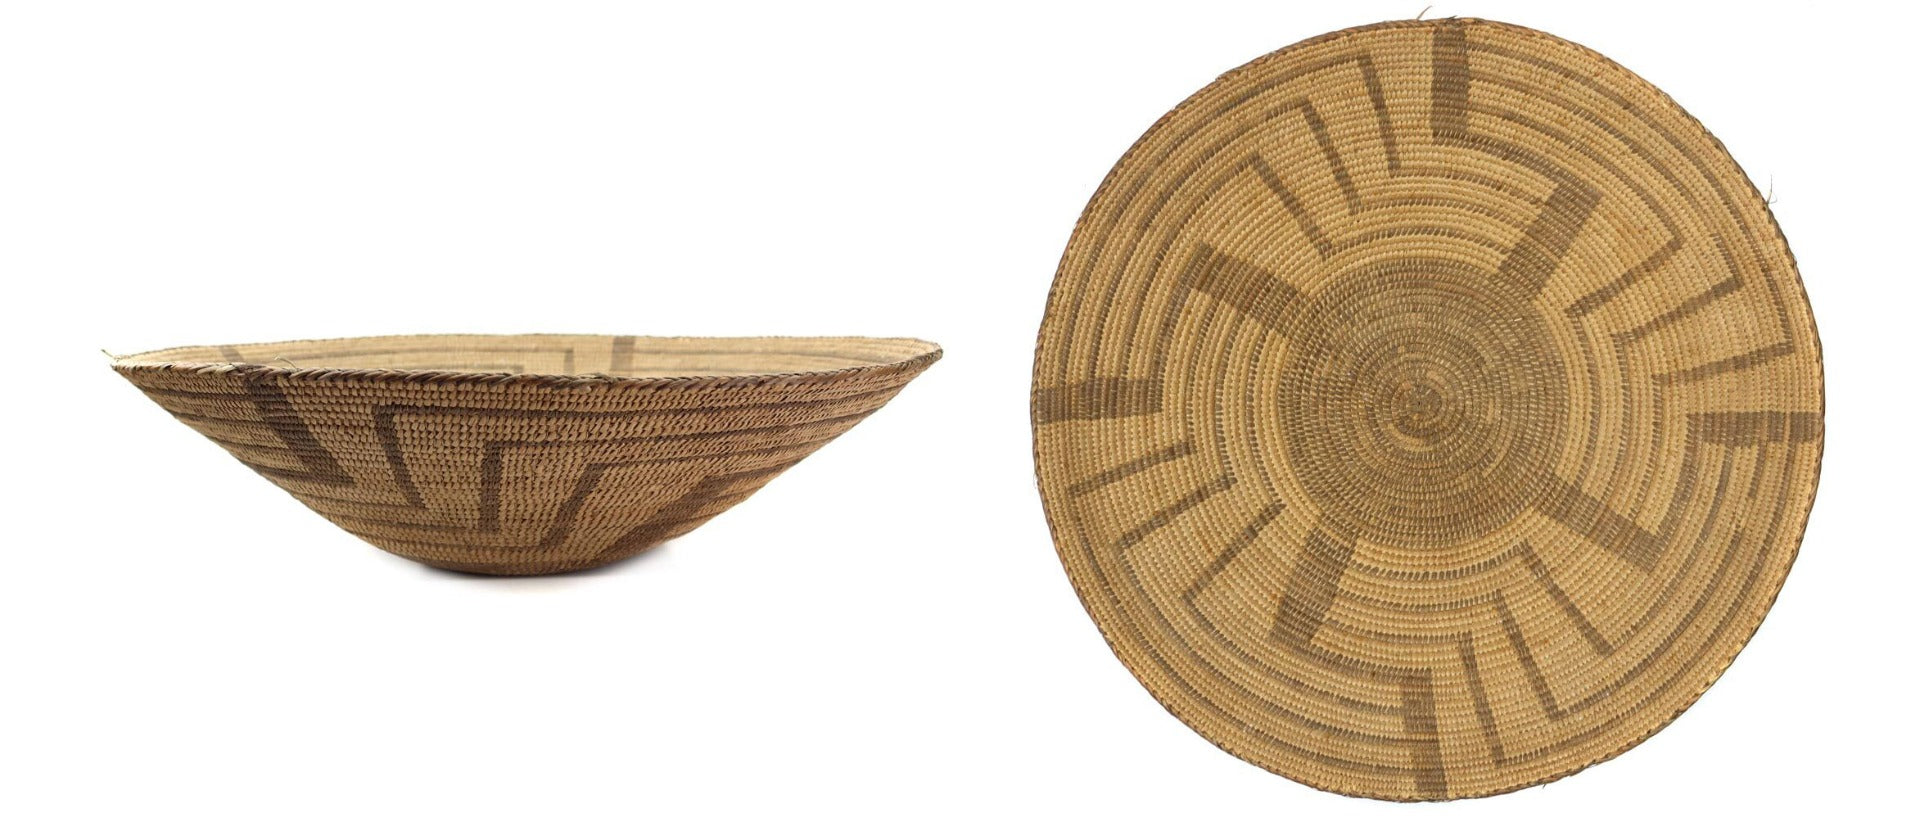 Pima Basket with Whirling Logs Design c. 1890s, 5" x 19" (SK3239)